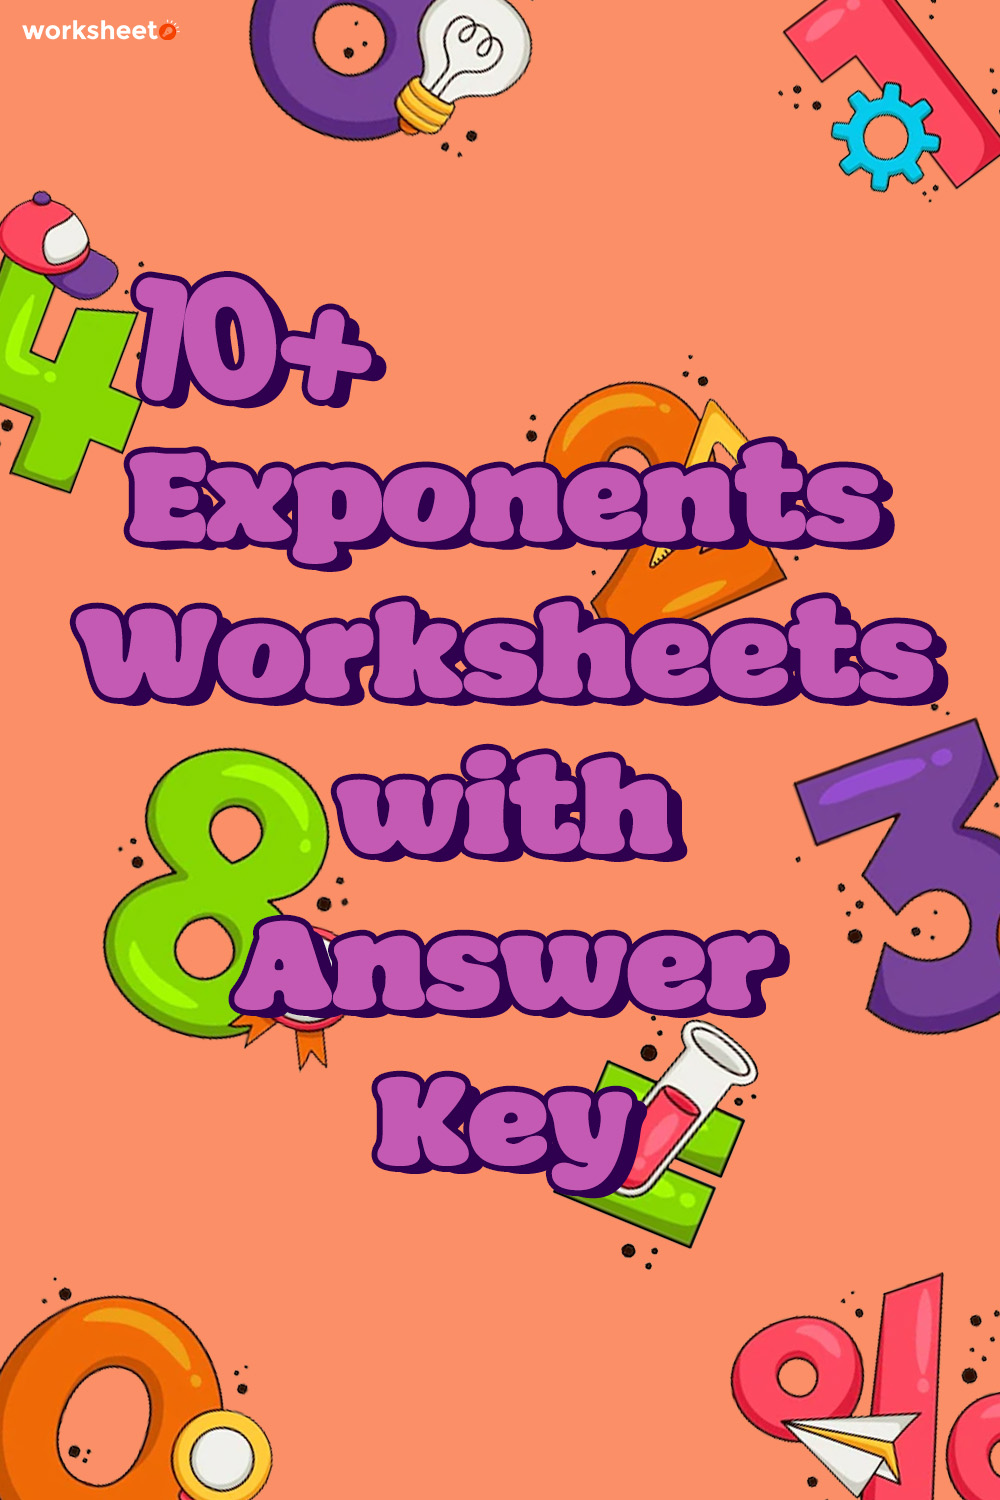 11 Exponents Worksheets With Answer Key Free PDF At Worksheeto